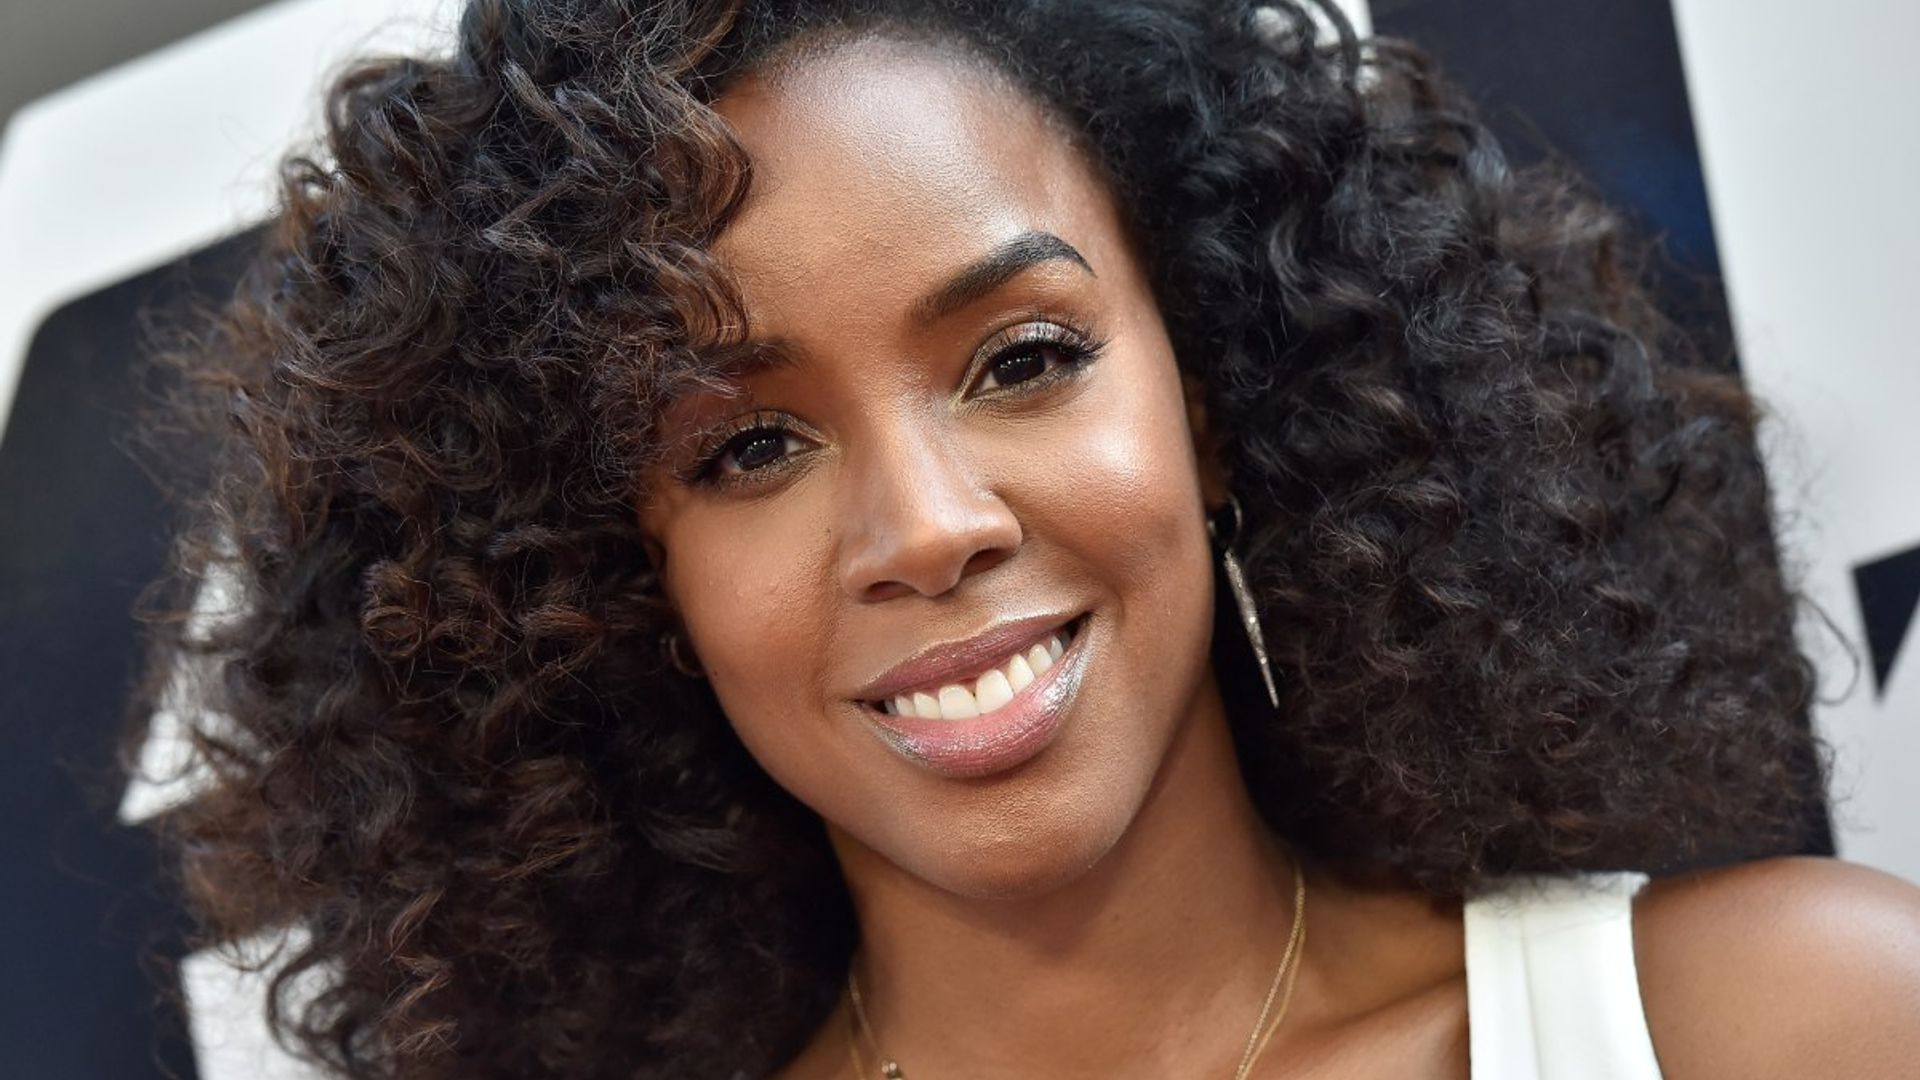 Kelly Rowland wows in jaw-dropping festive photo that sparks reaction ...